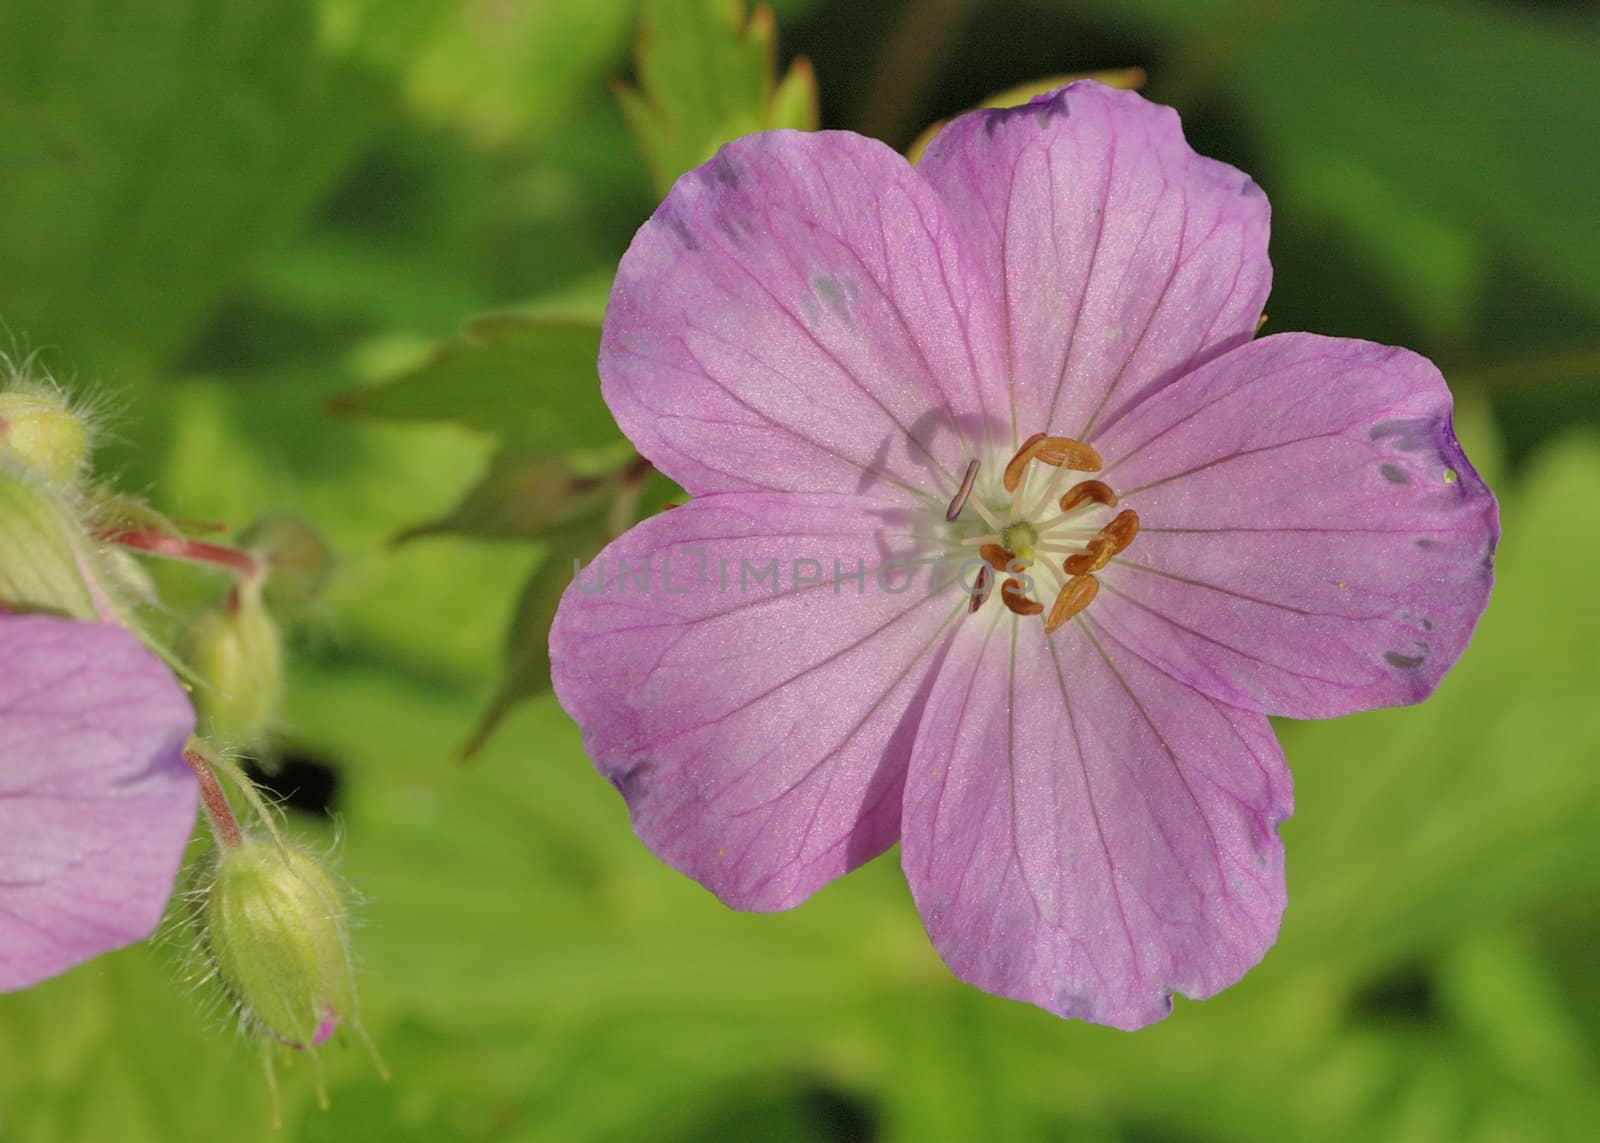 A close up of a common wood sorrel blossom in late spring.